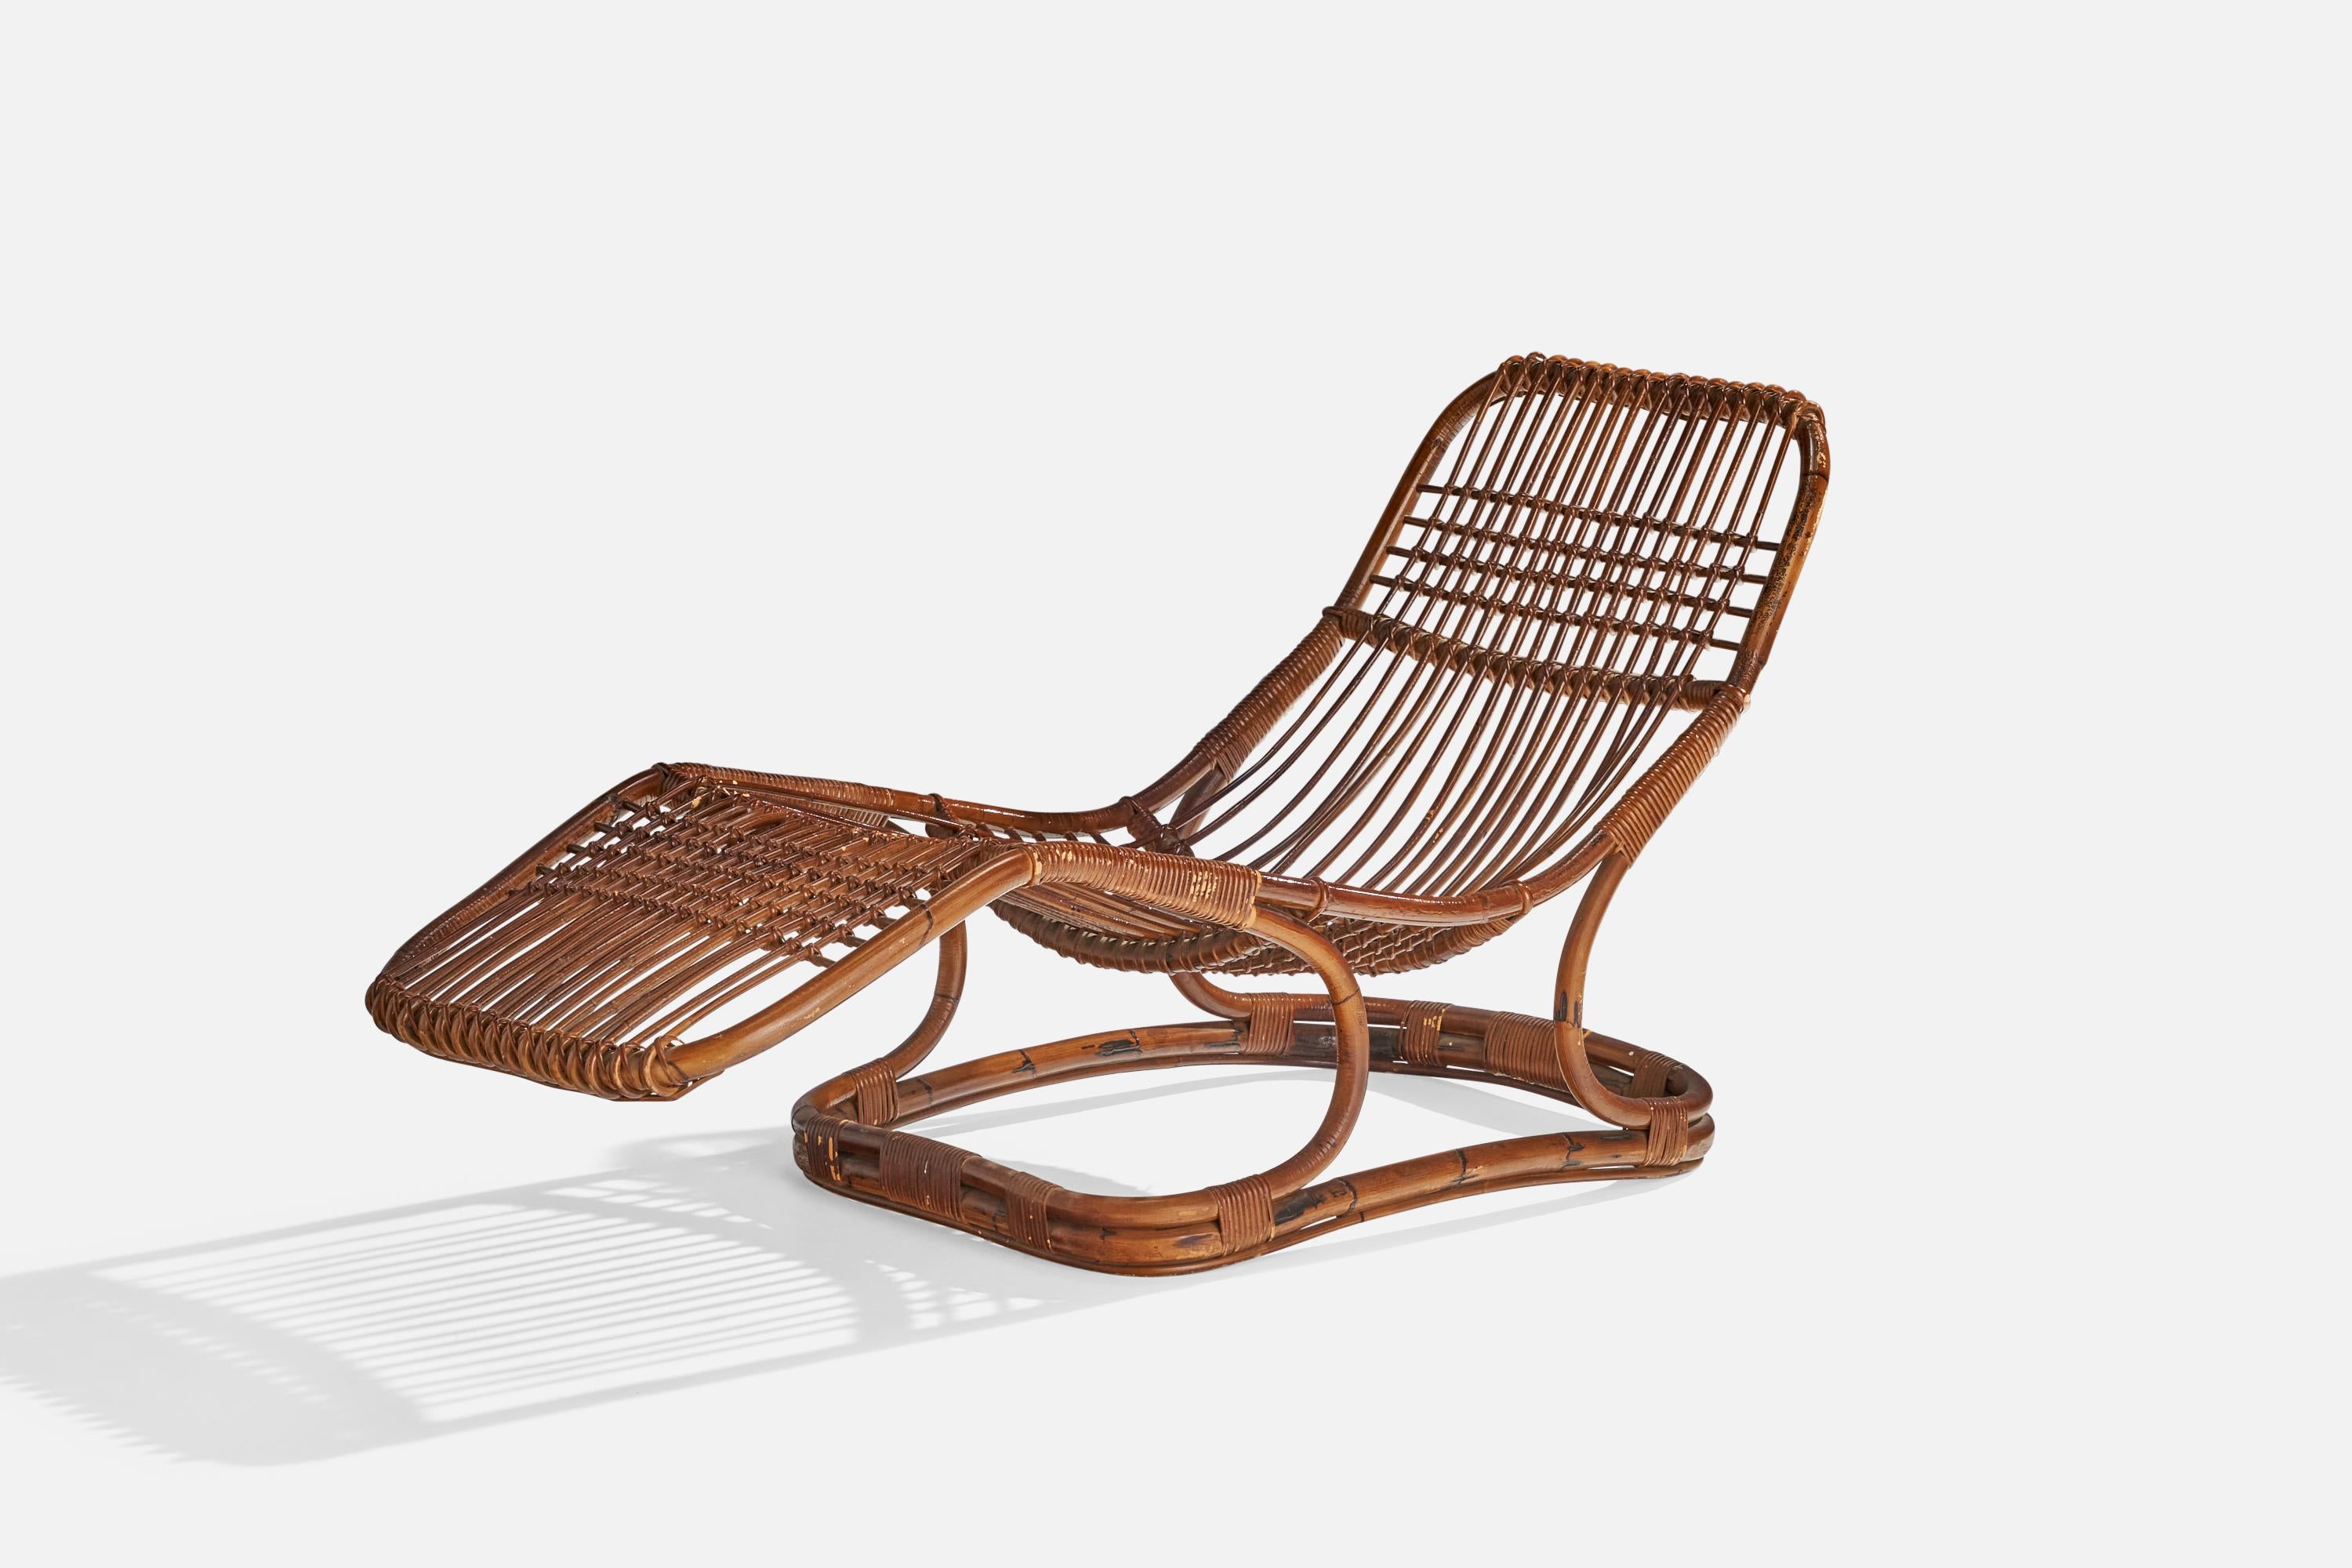 Tito Agnoli, Chaise Longue, Rattan, Bamboo, Italy, 1963 In Good Condition For Sale In High Point, NC